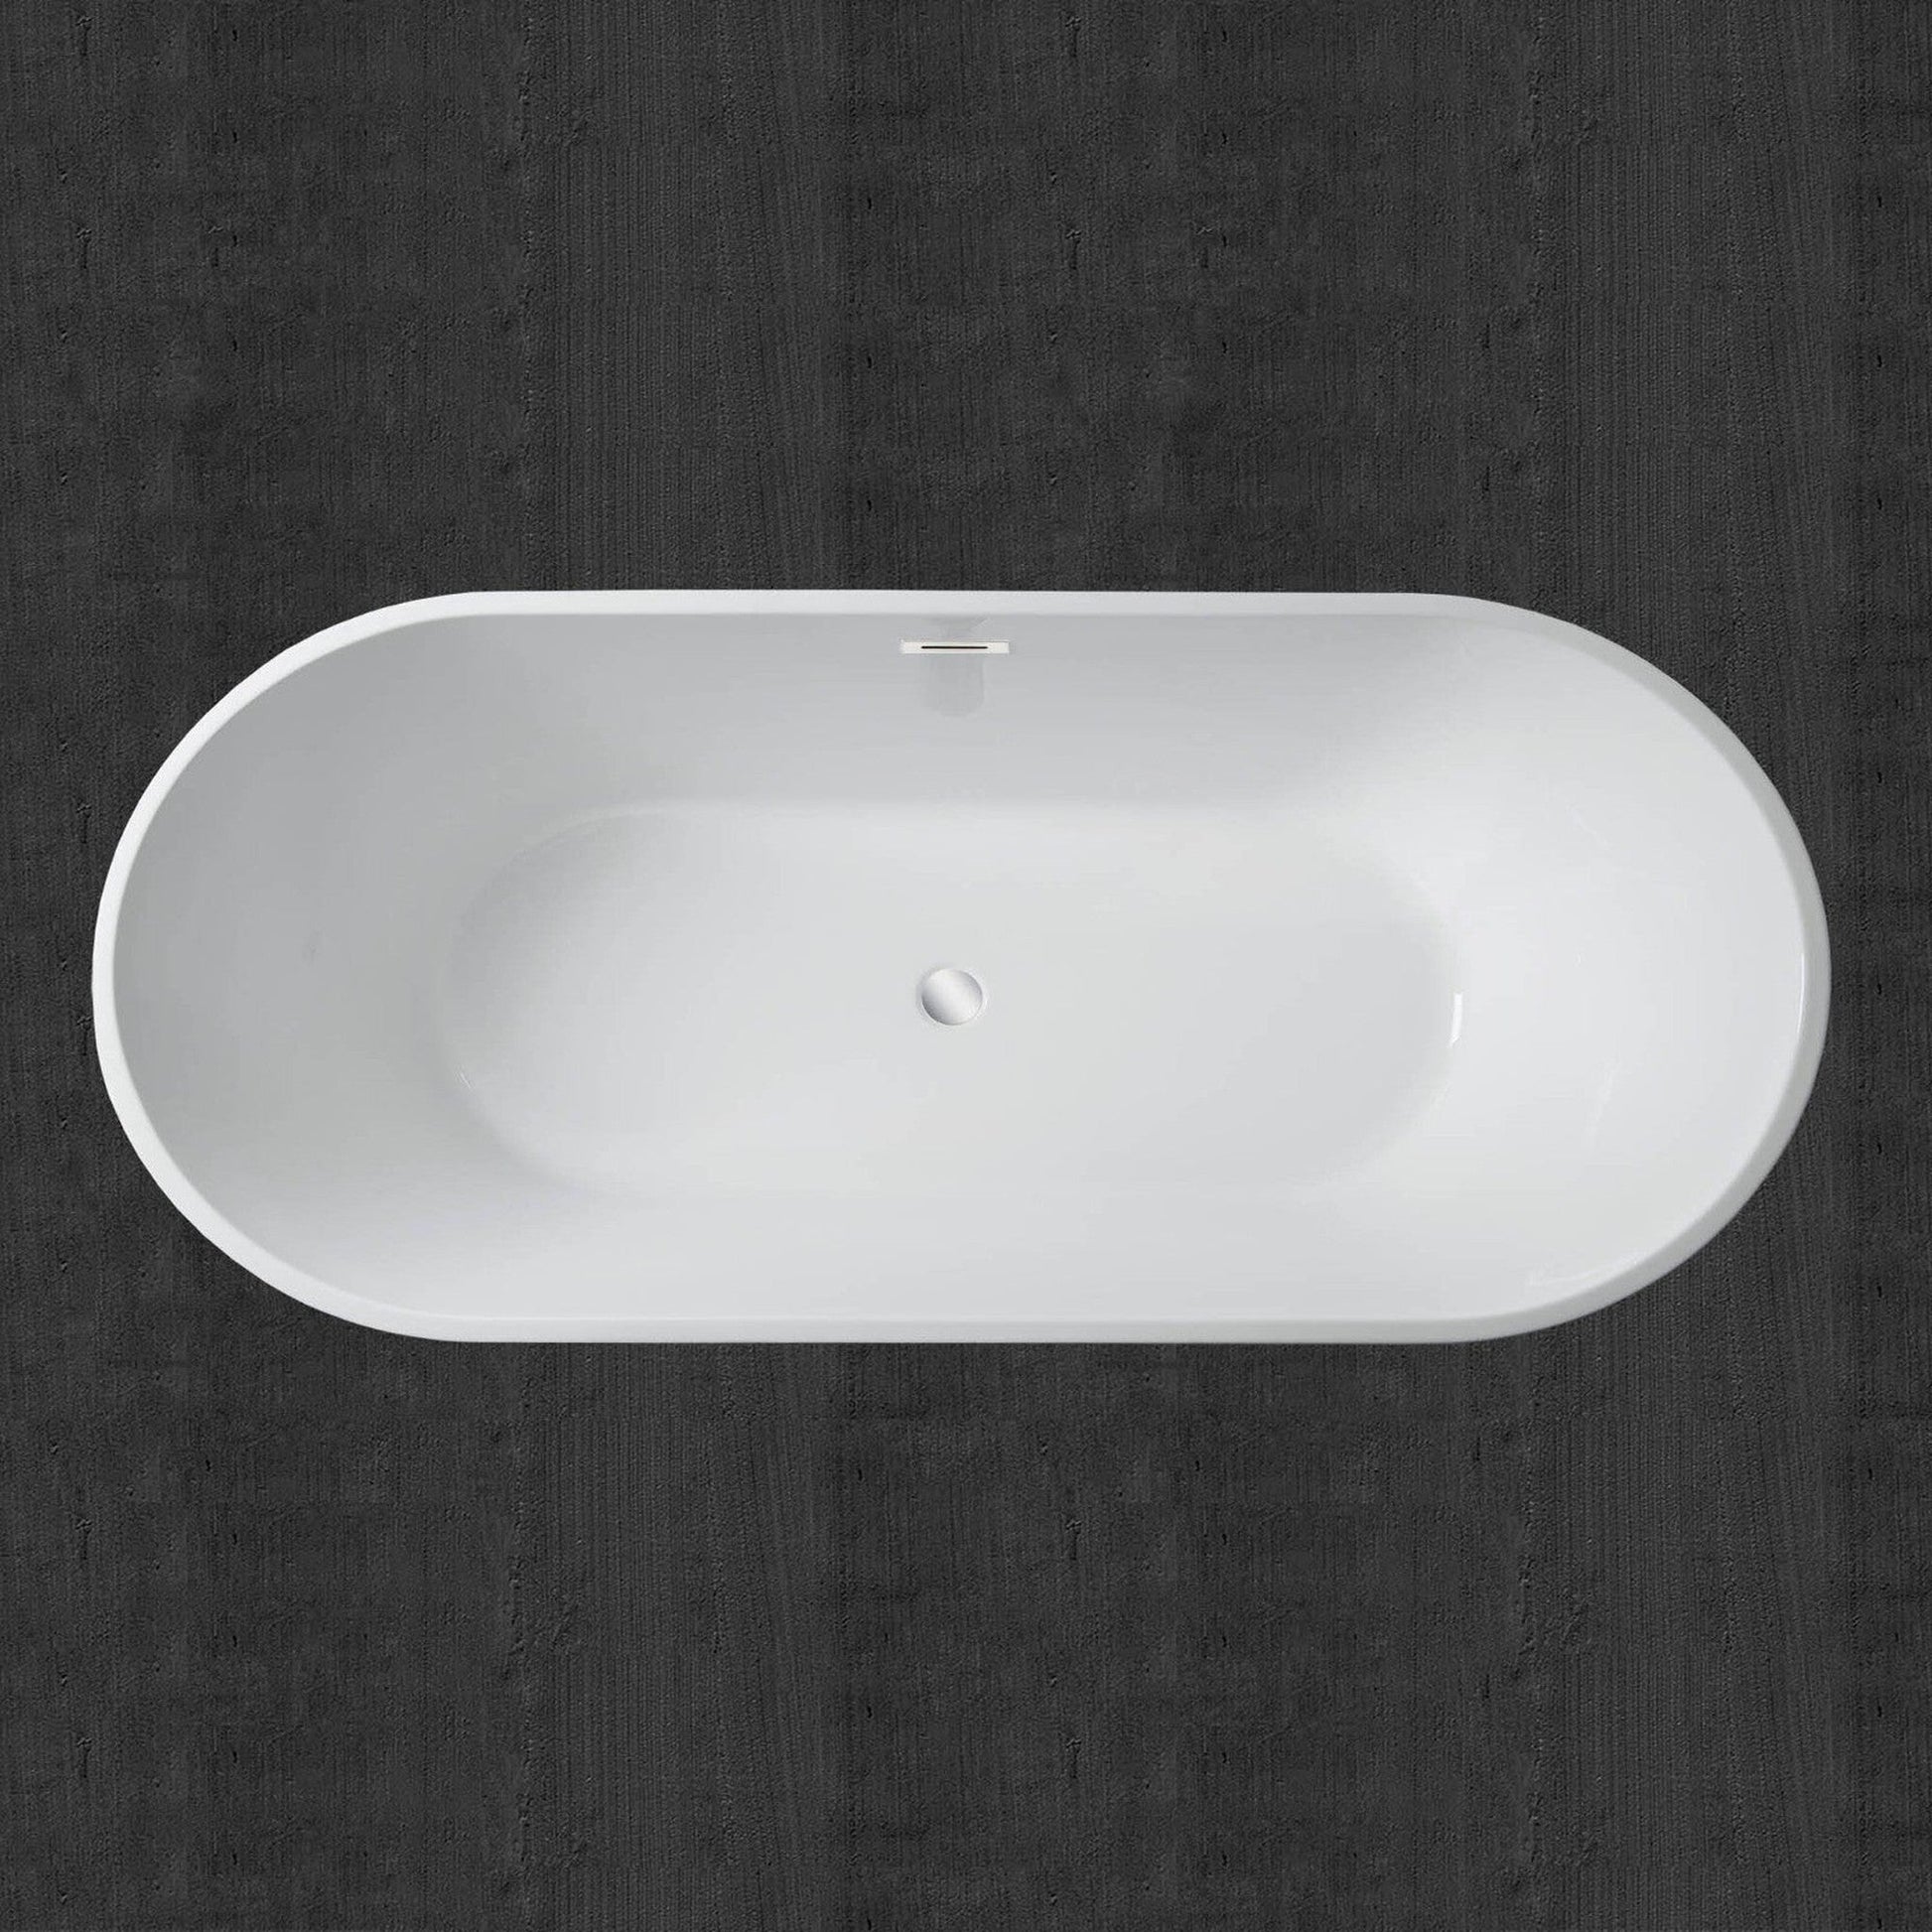 WoodBridge 71" White Acrylic Freestanding Contemporary Soaking Bathtub With Chrome Drain, Overflow, F0036CH Tub Filler and Caddy Tray